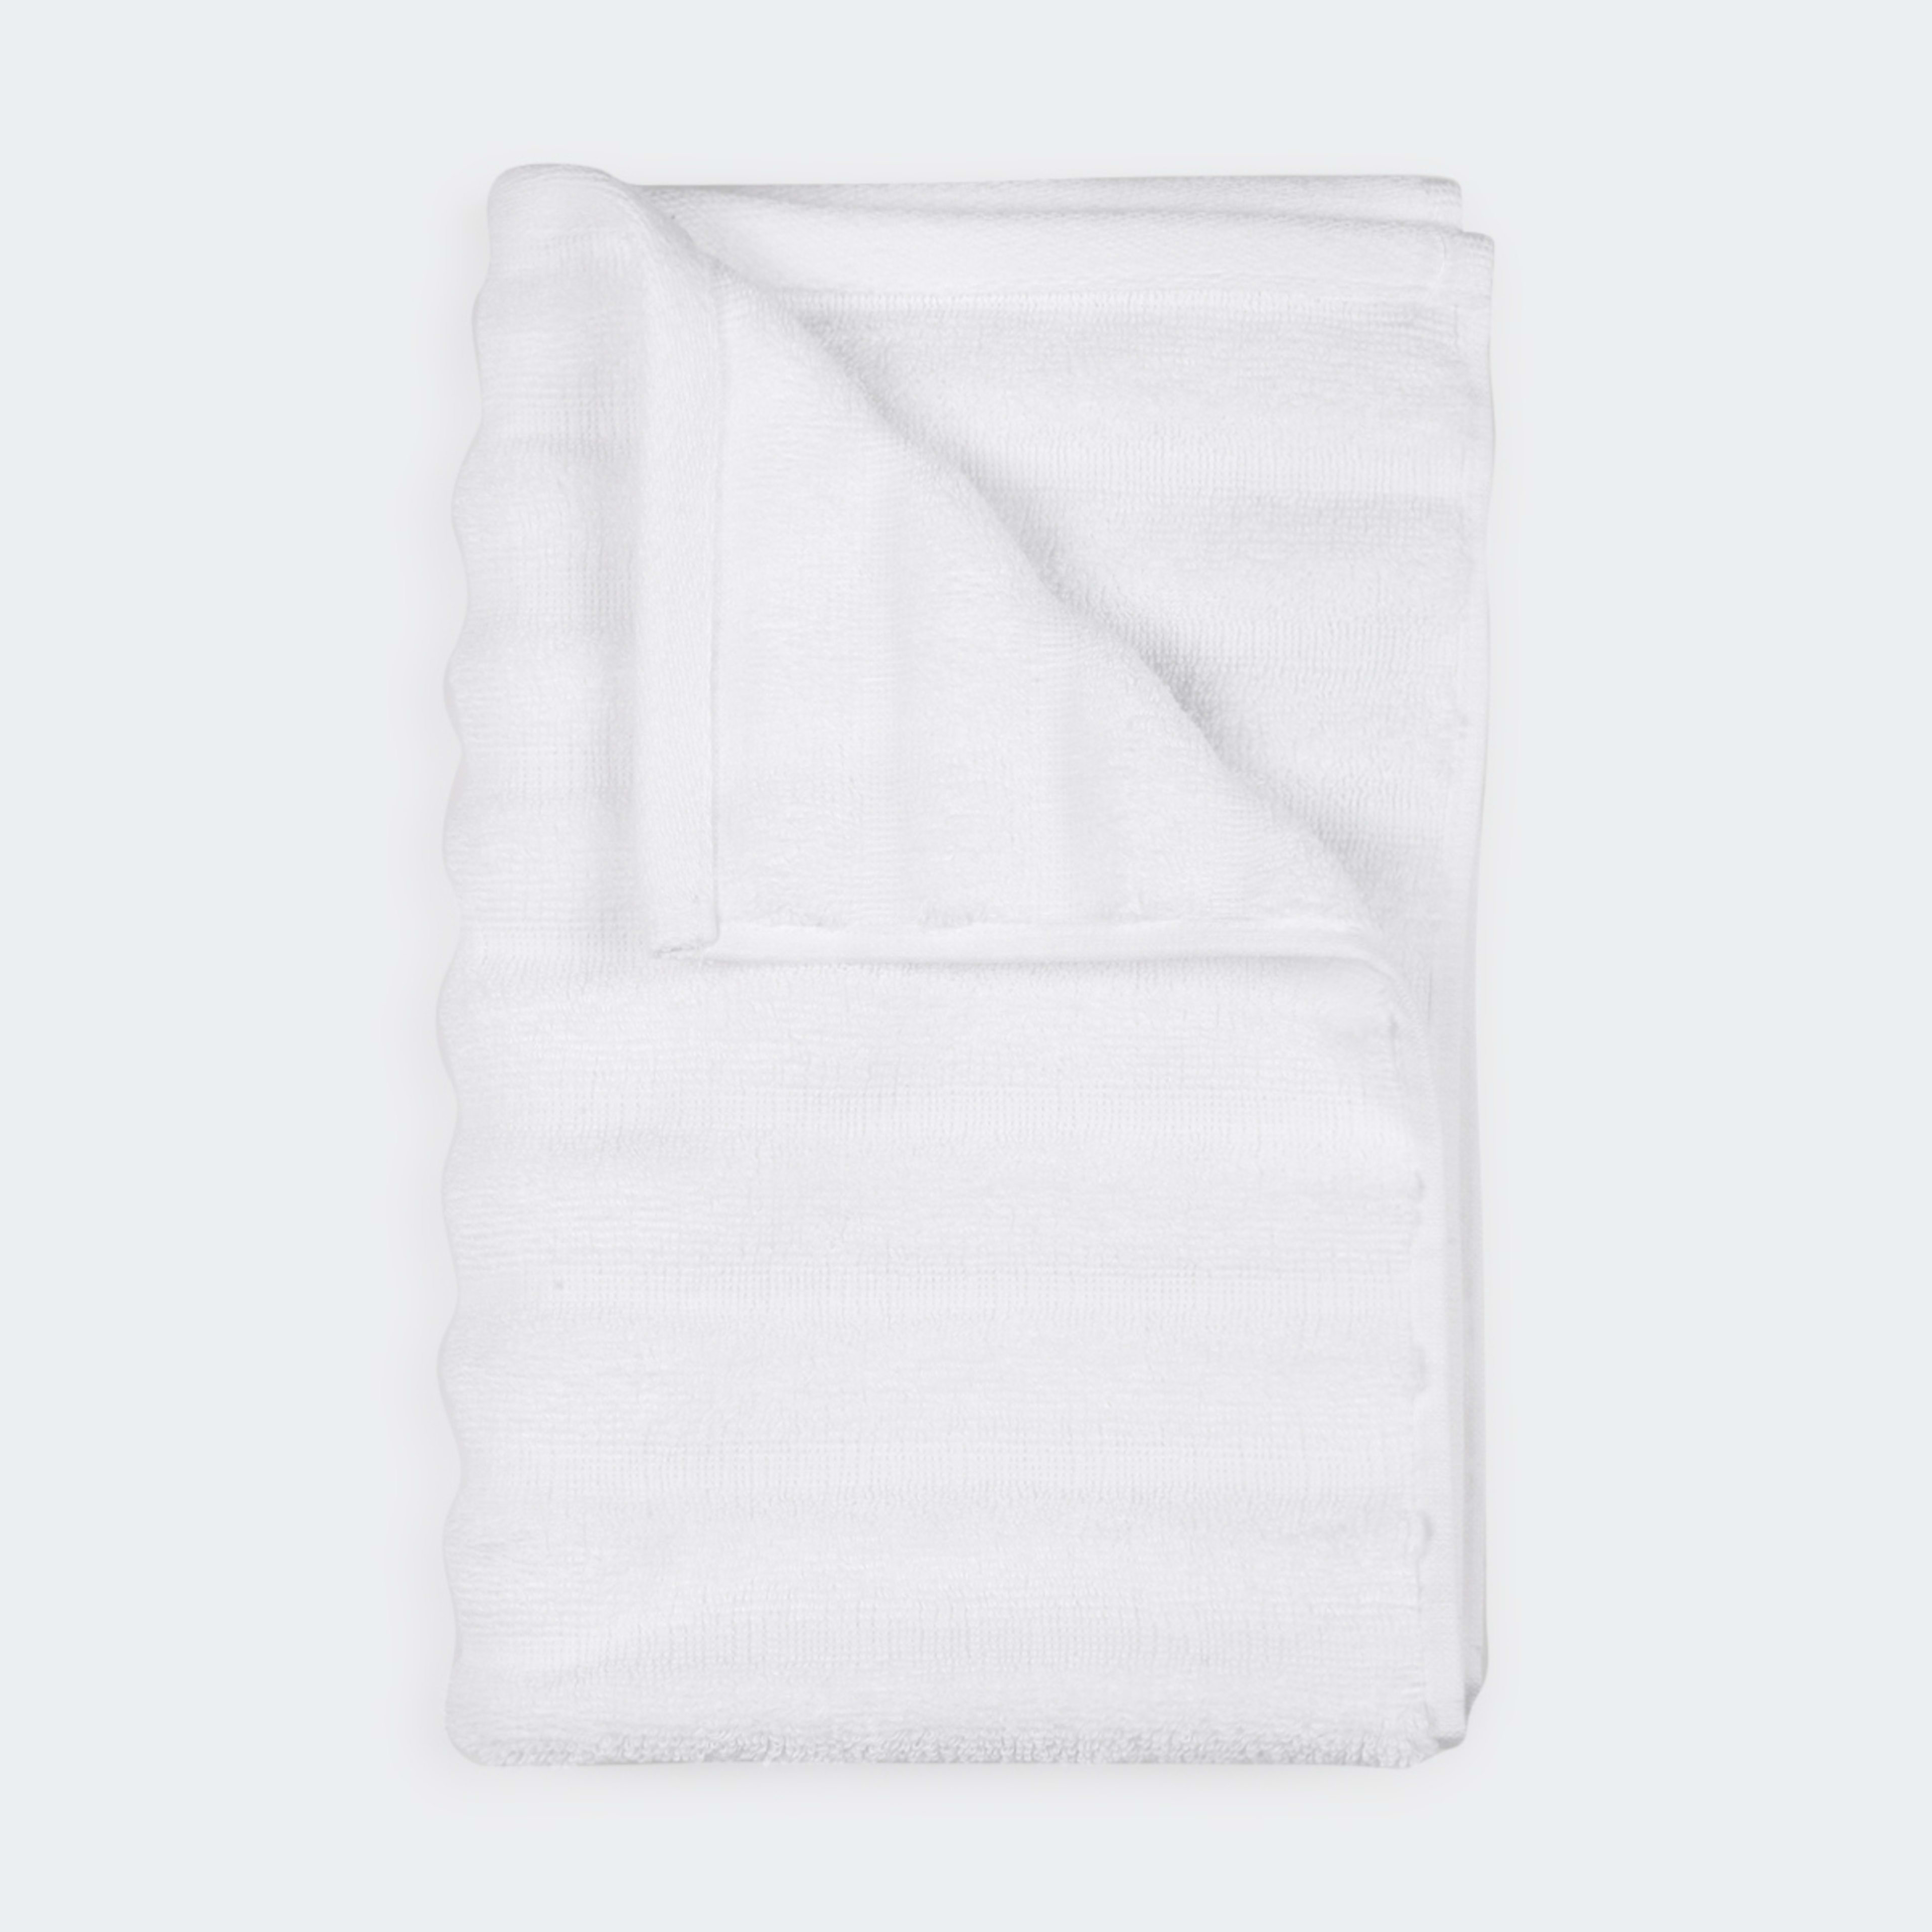 Thick Ribbed Australian Cotton Hand Towel - White